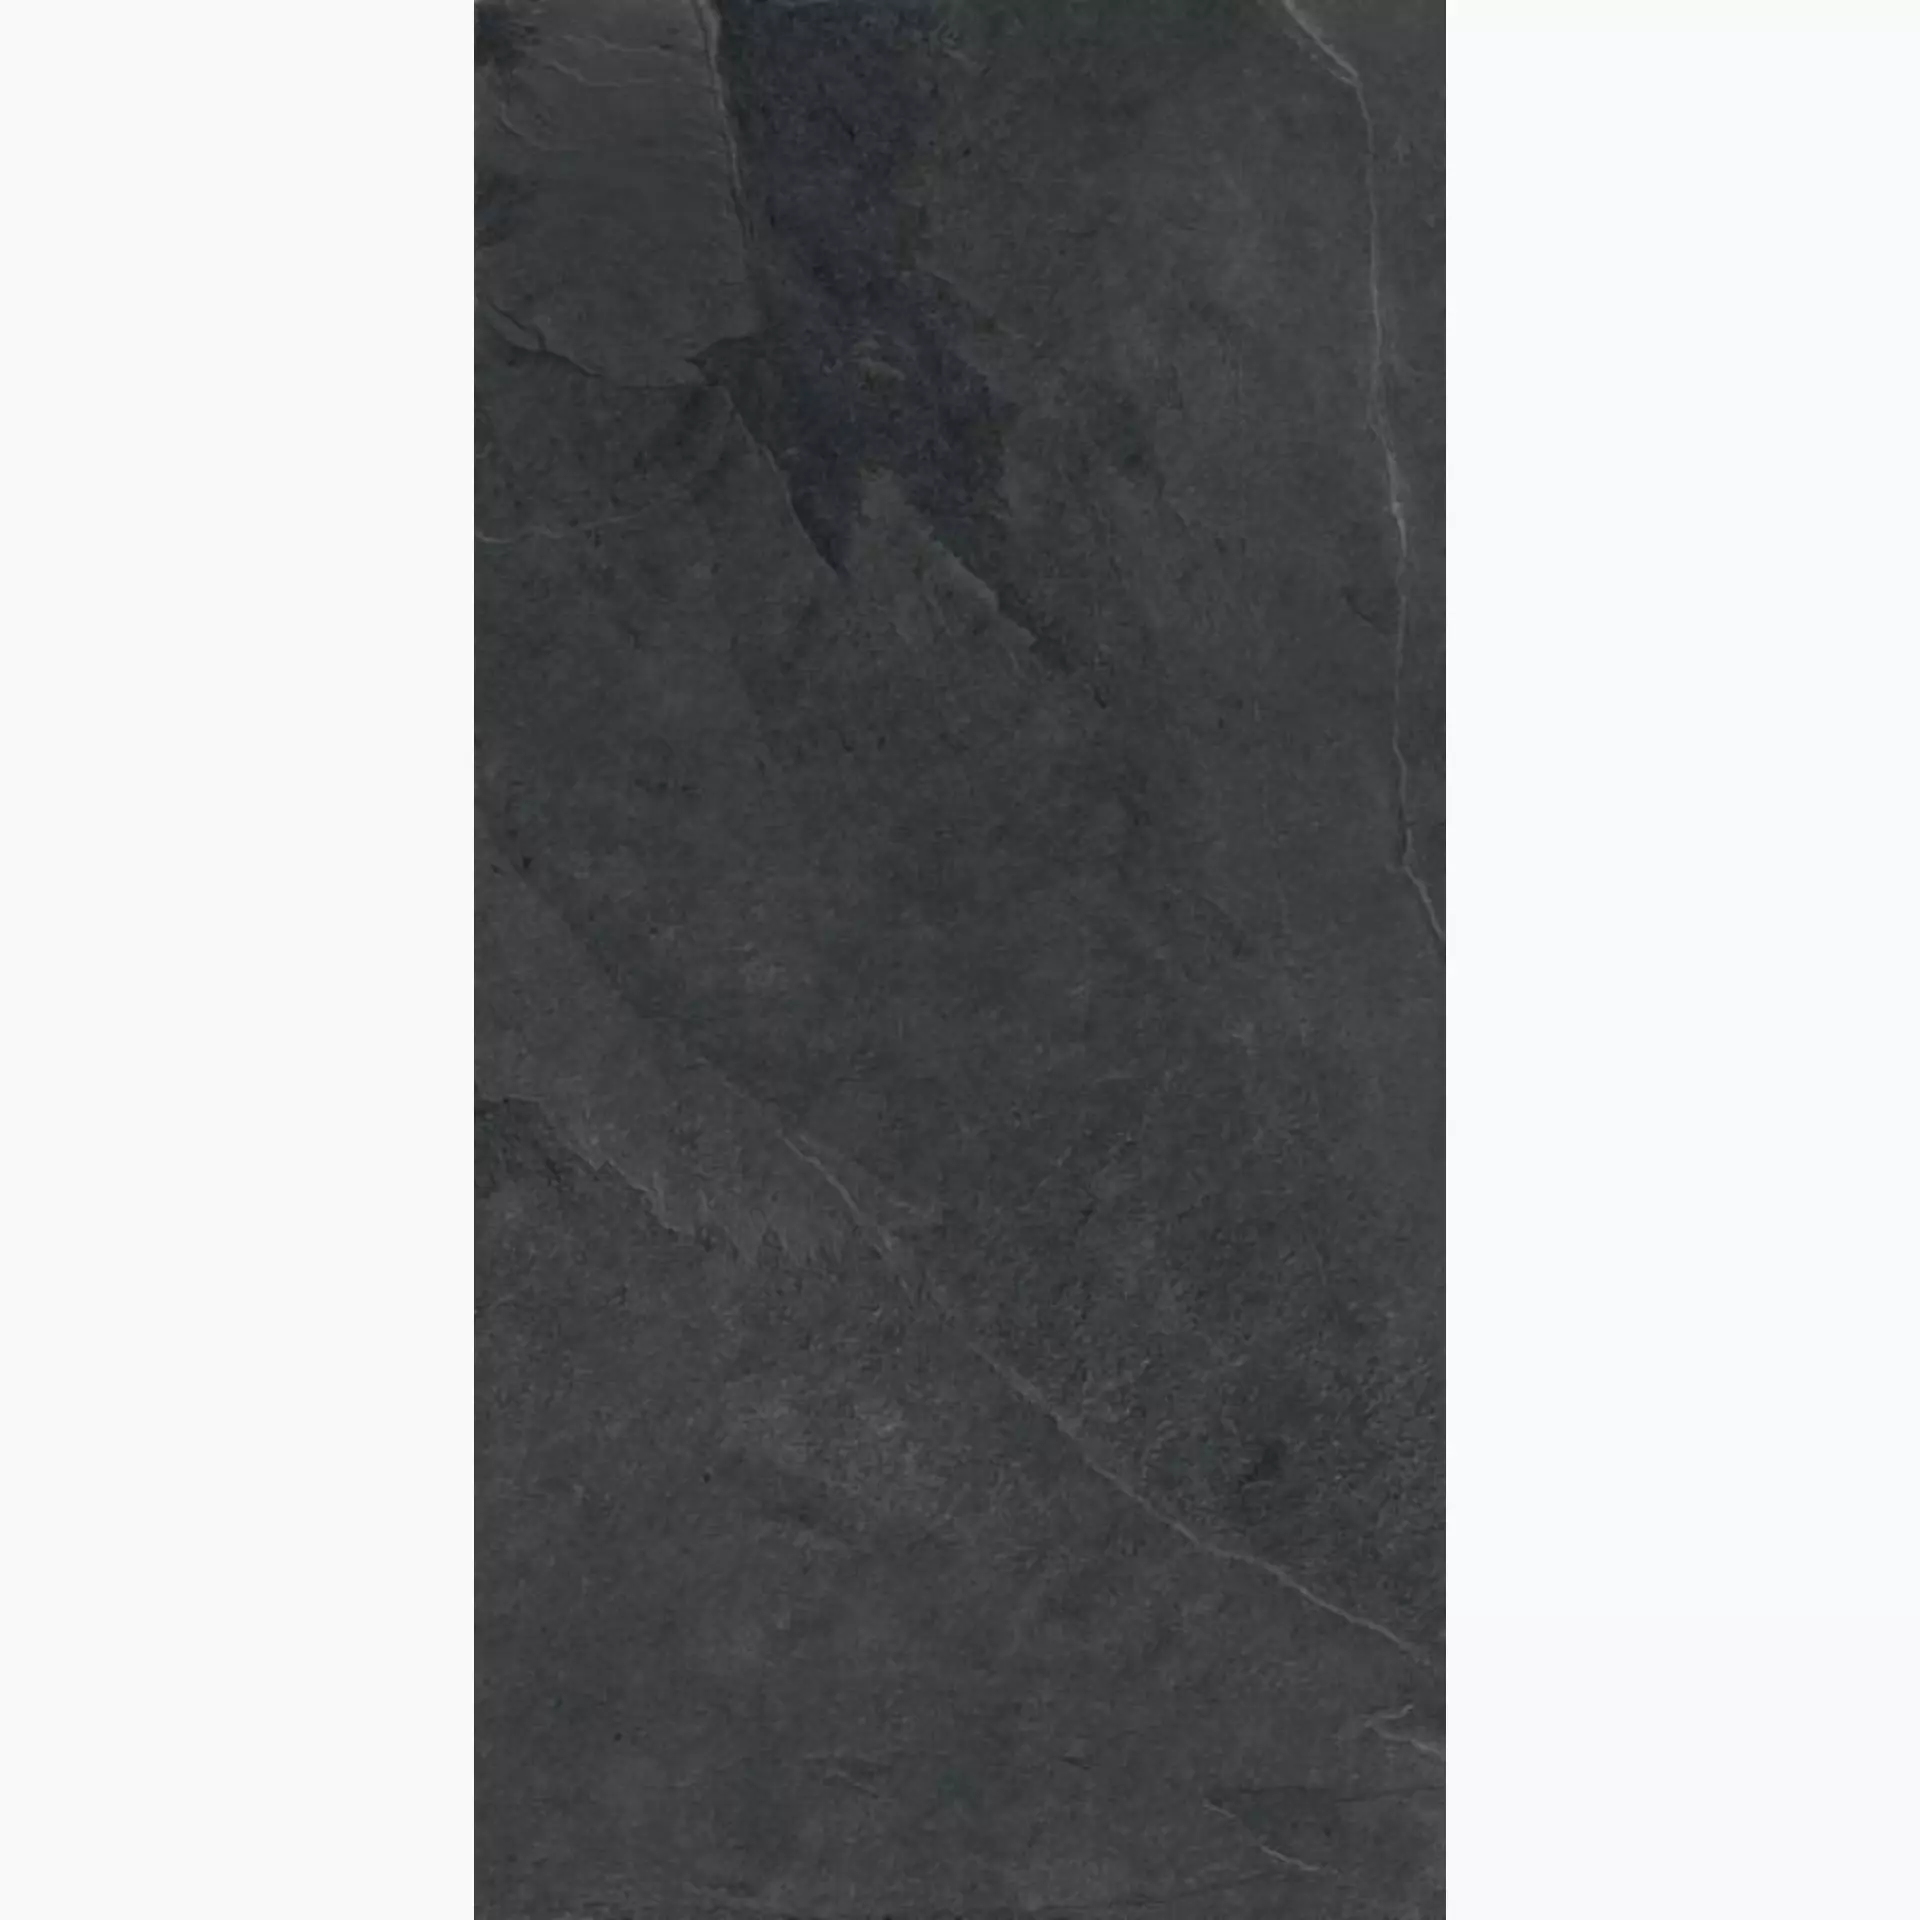 Sant Agostino Unionstone Mustang Natural CSAMSTNG12 60x120cm rectified 10mm